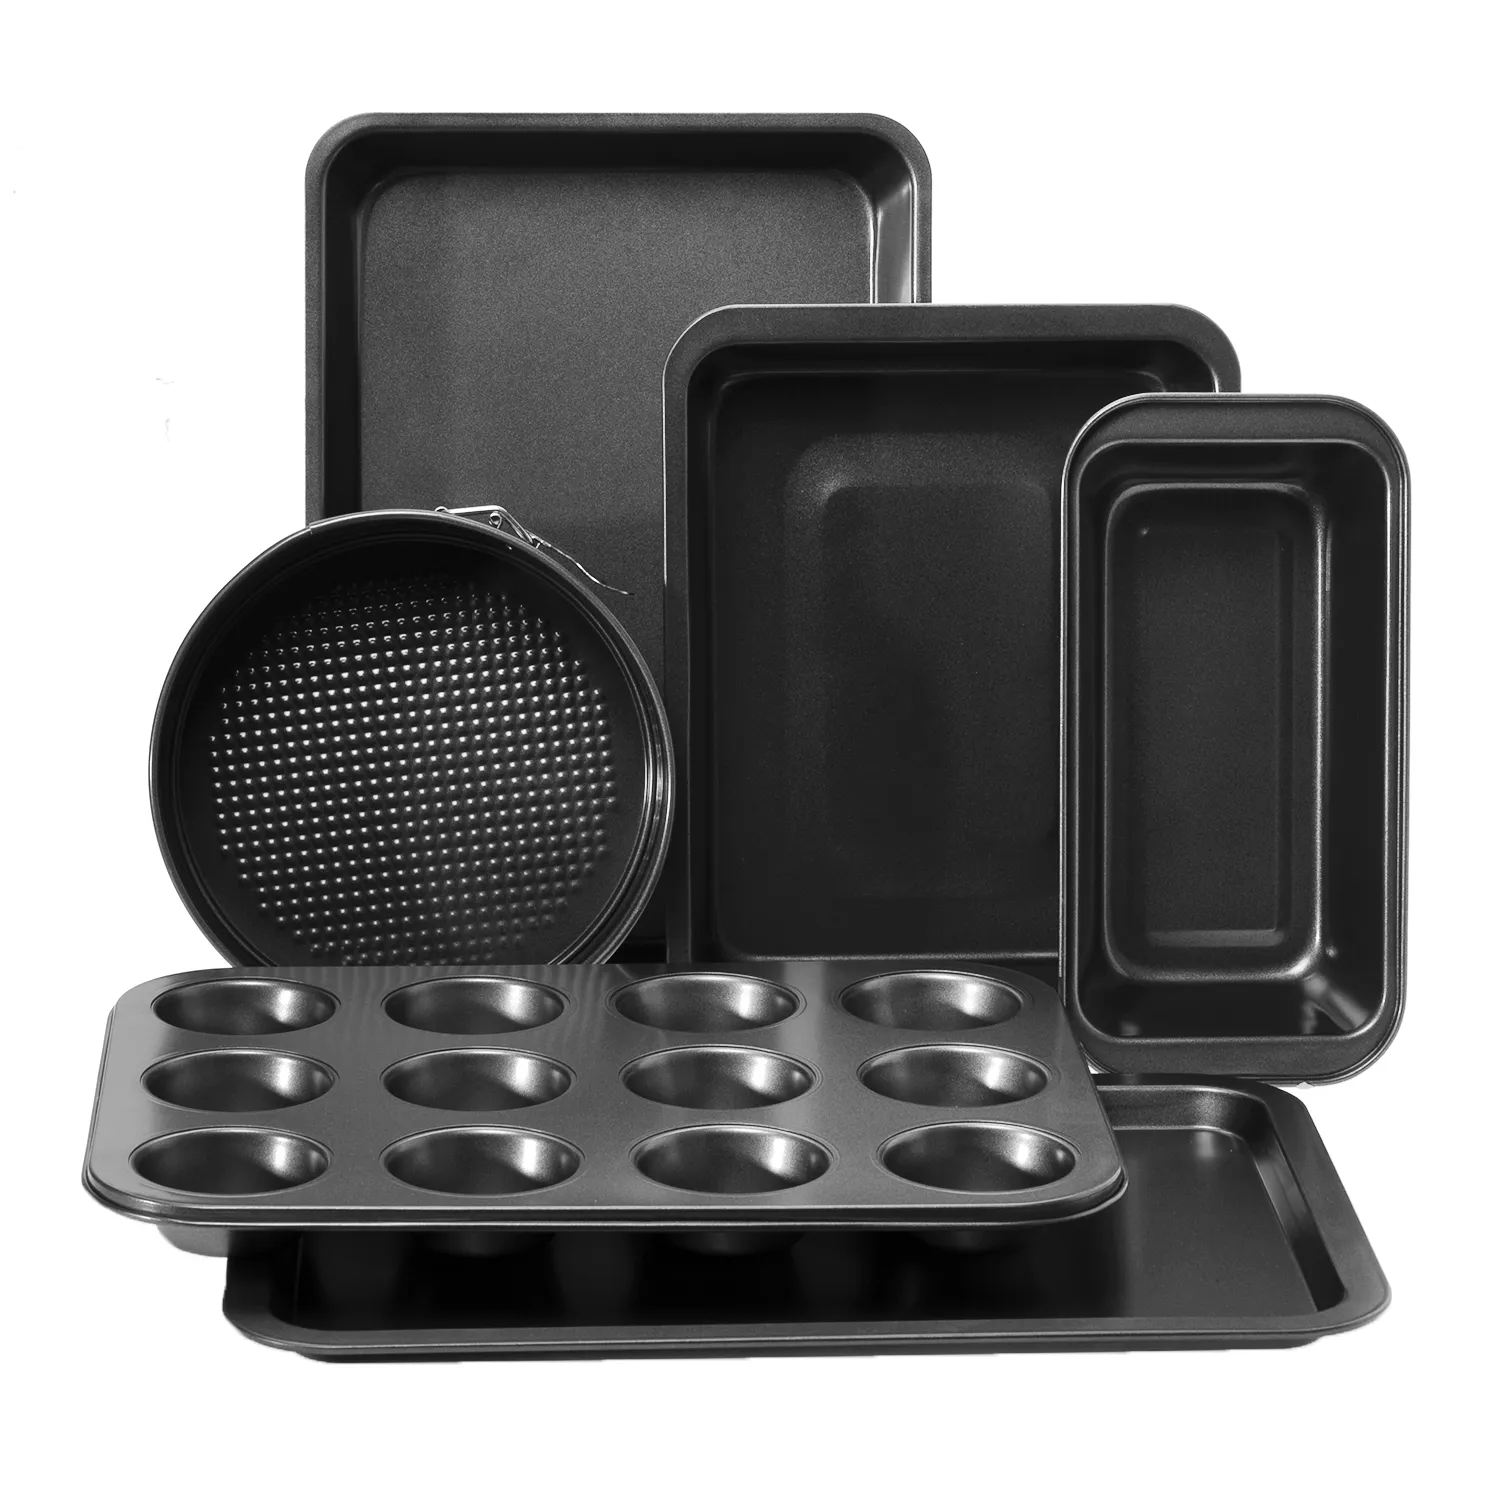 Royalford 6 PCS Bakeware Set Carbon Steel, Oven Safe, Premium Non-Stick Coating, 0.4MM Thick, PFOA, PTFE, and BFA Free